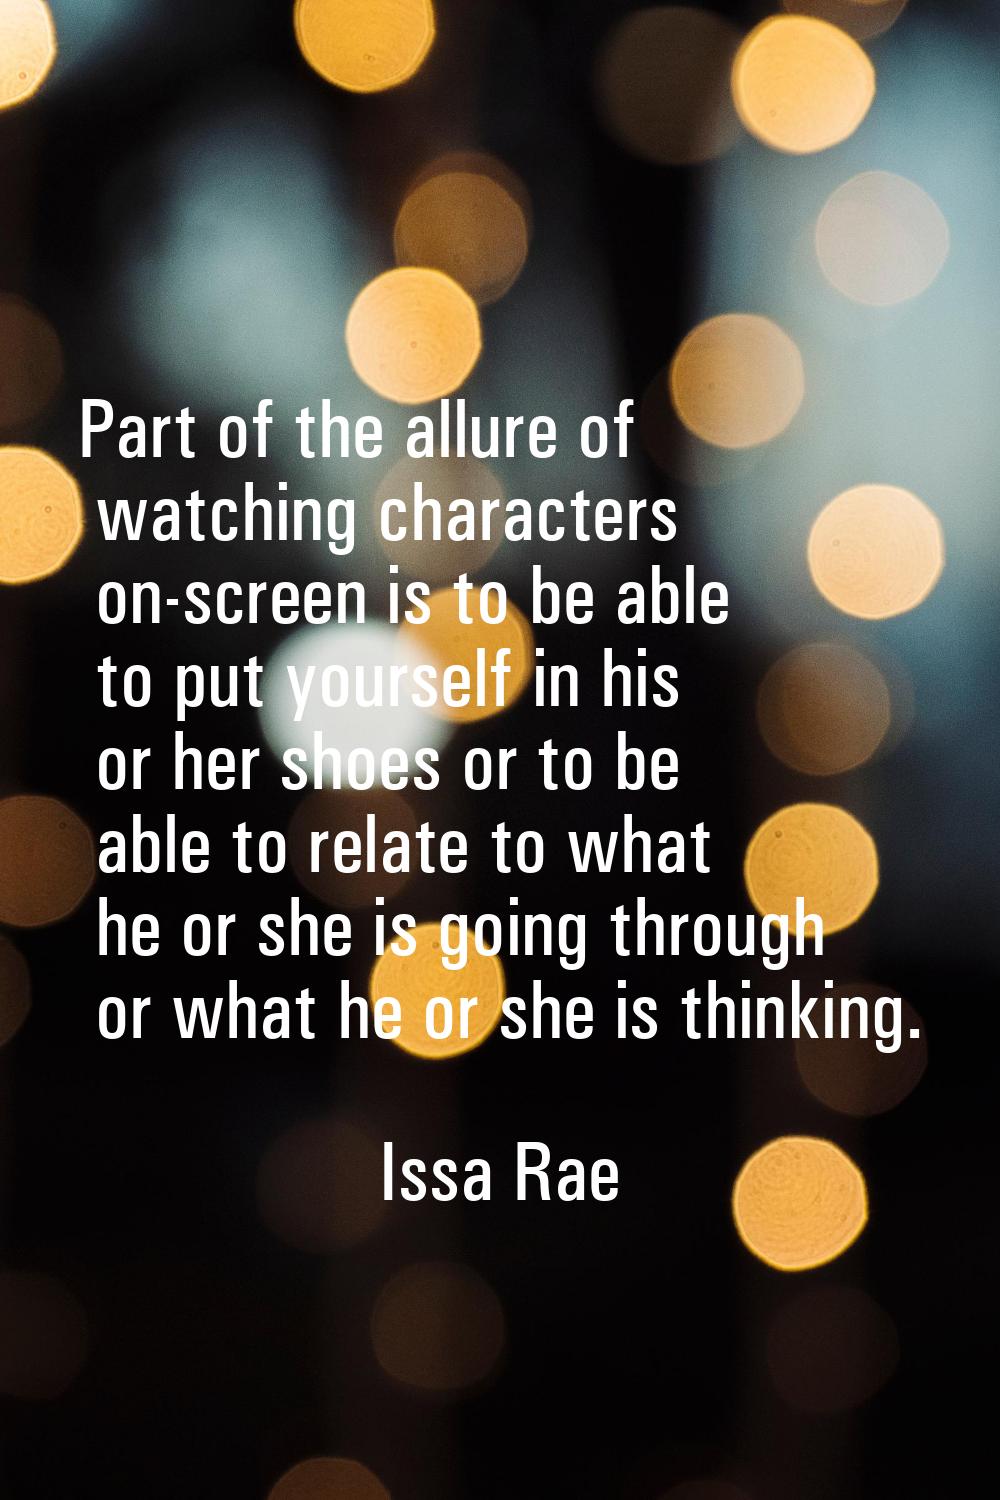 Part of the allure of watching characters on-screen is to be able to put yourself in his or her sho